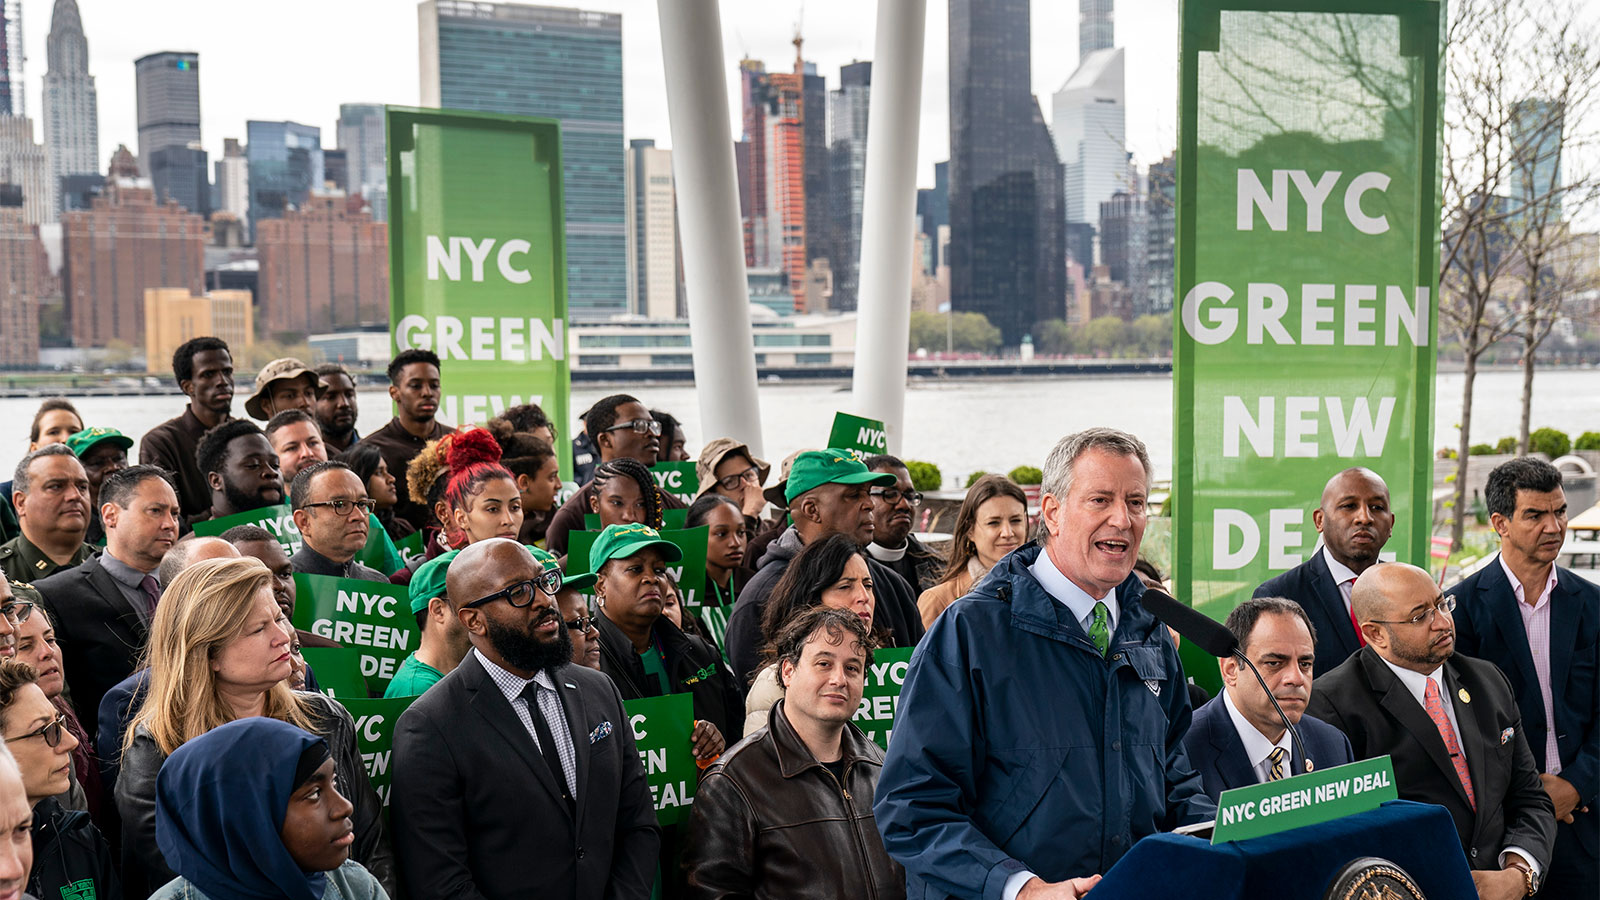 New York City Mayor Bill de Blasio speaks about the city's strategy to respond to climate change at Hunters Point South Park, April 22, 2019 in the Queens borough of New York City.